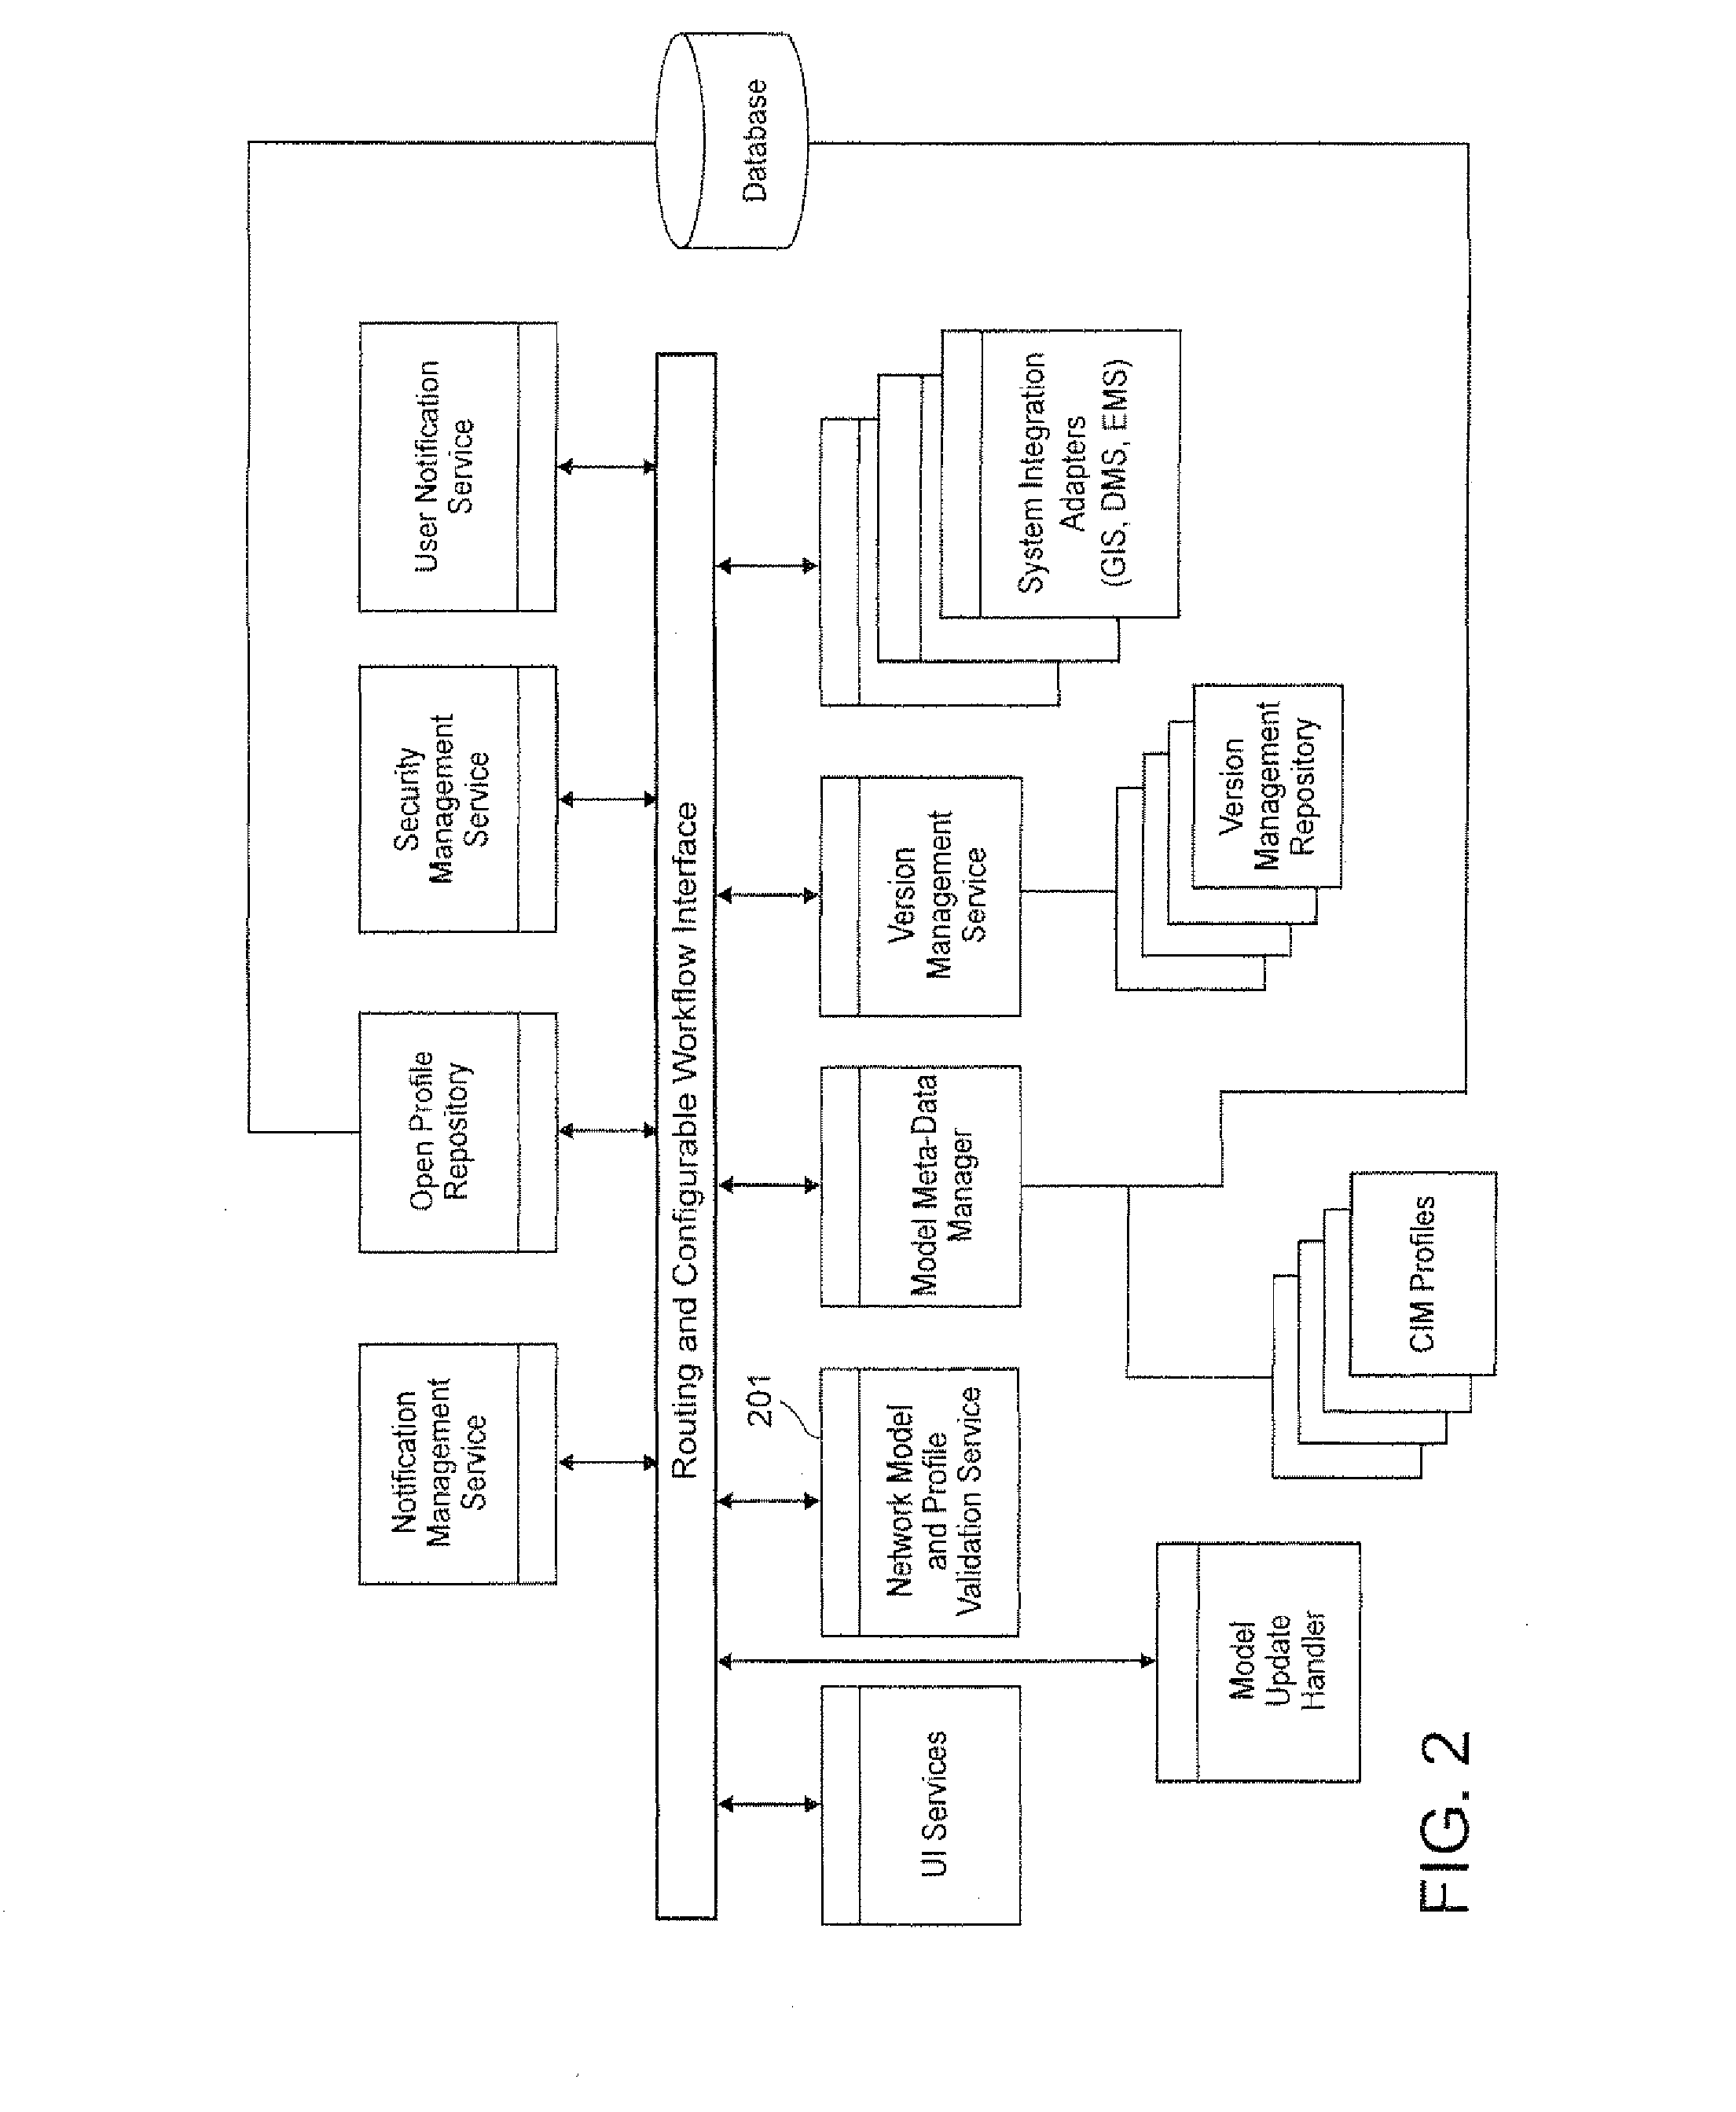 Method and program product for validation of circuit models for phase connectivity